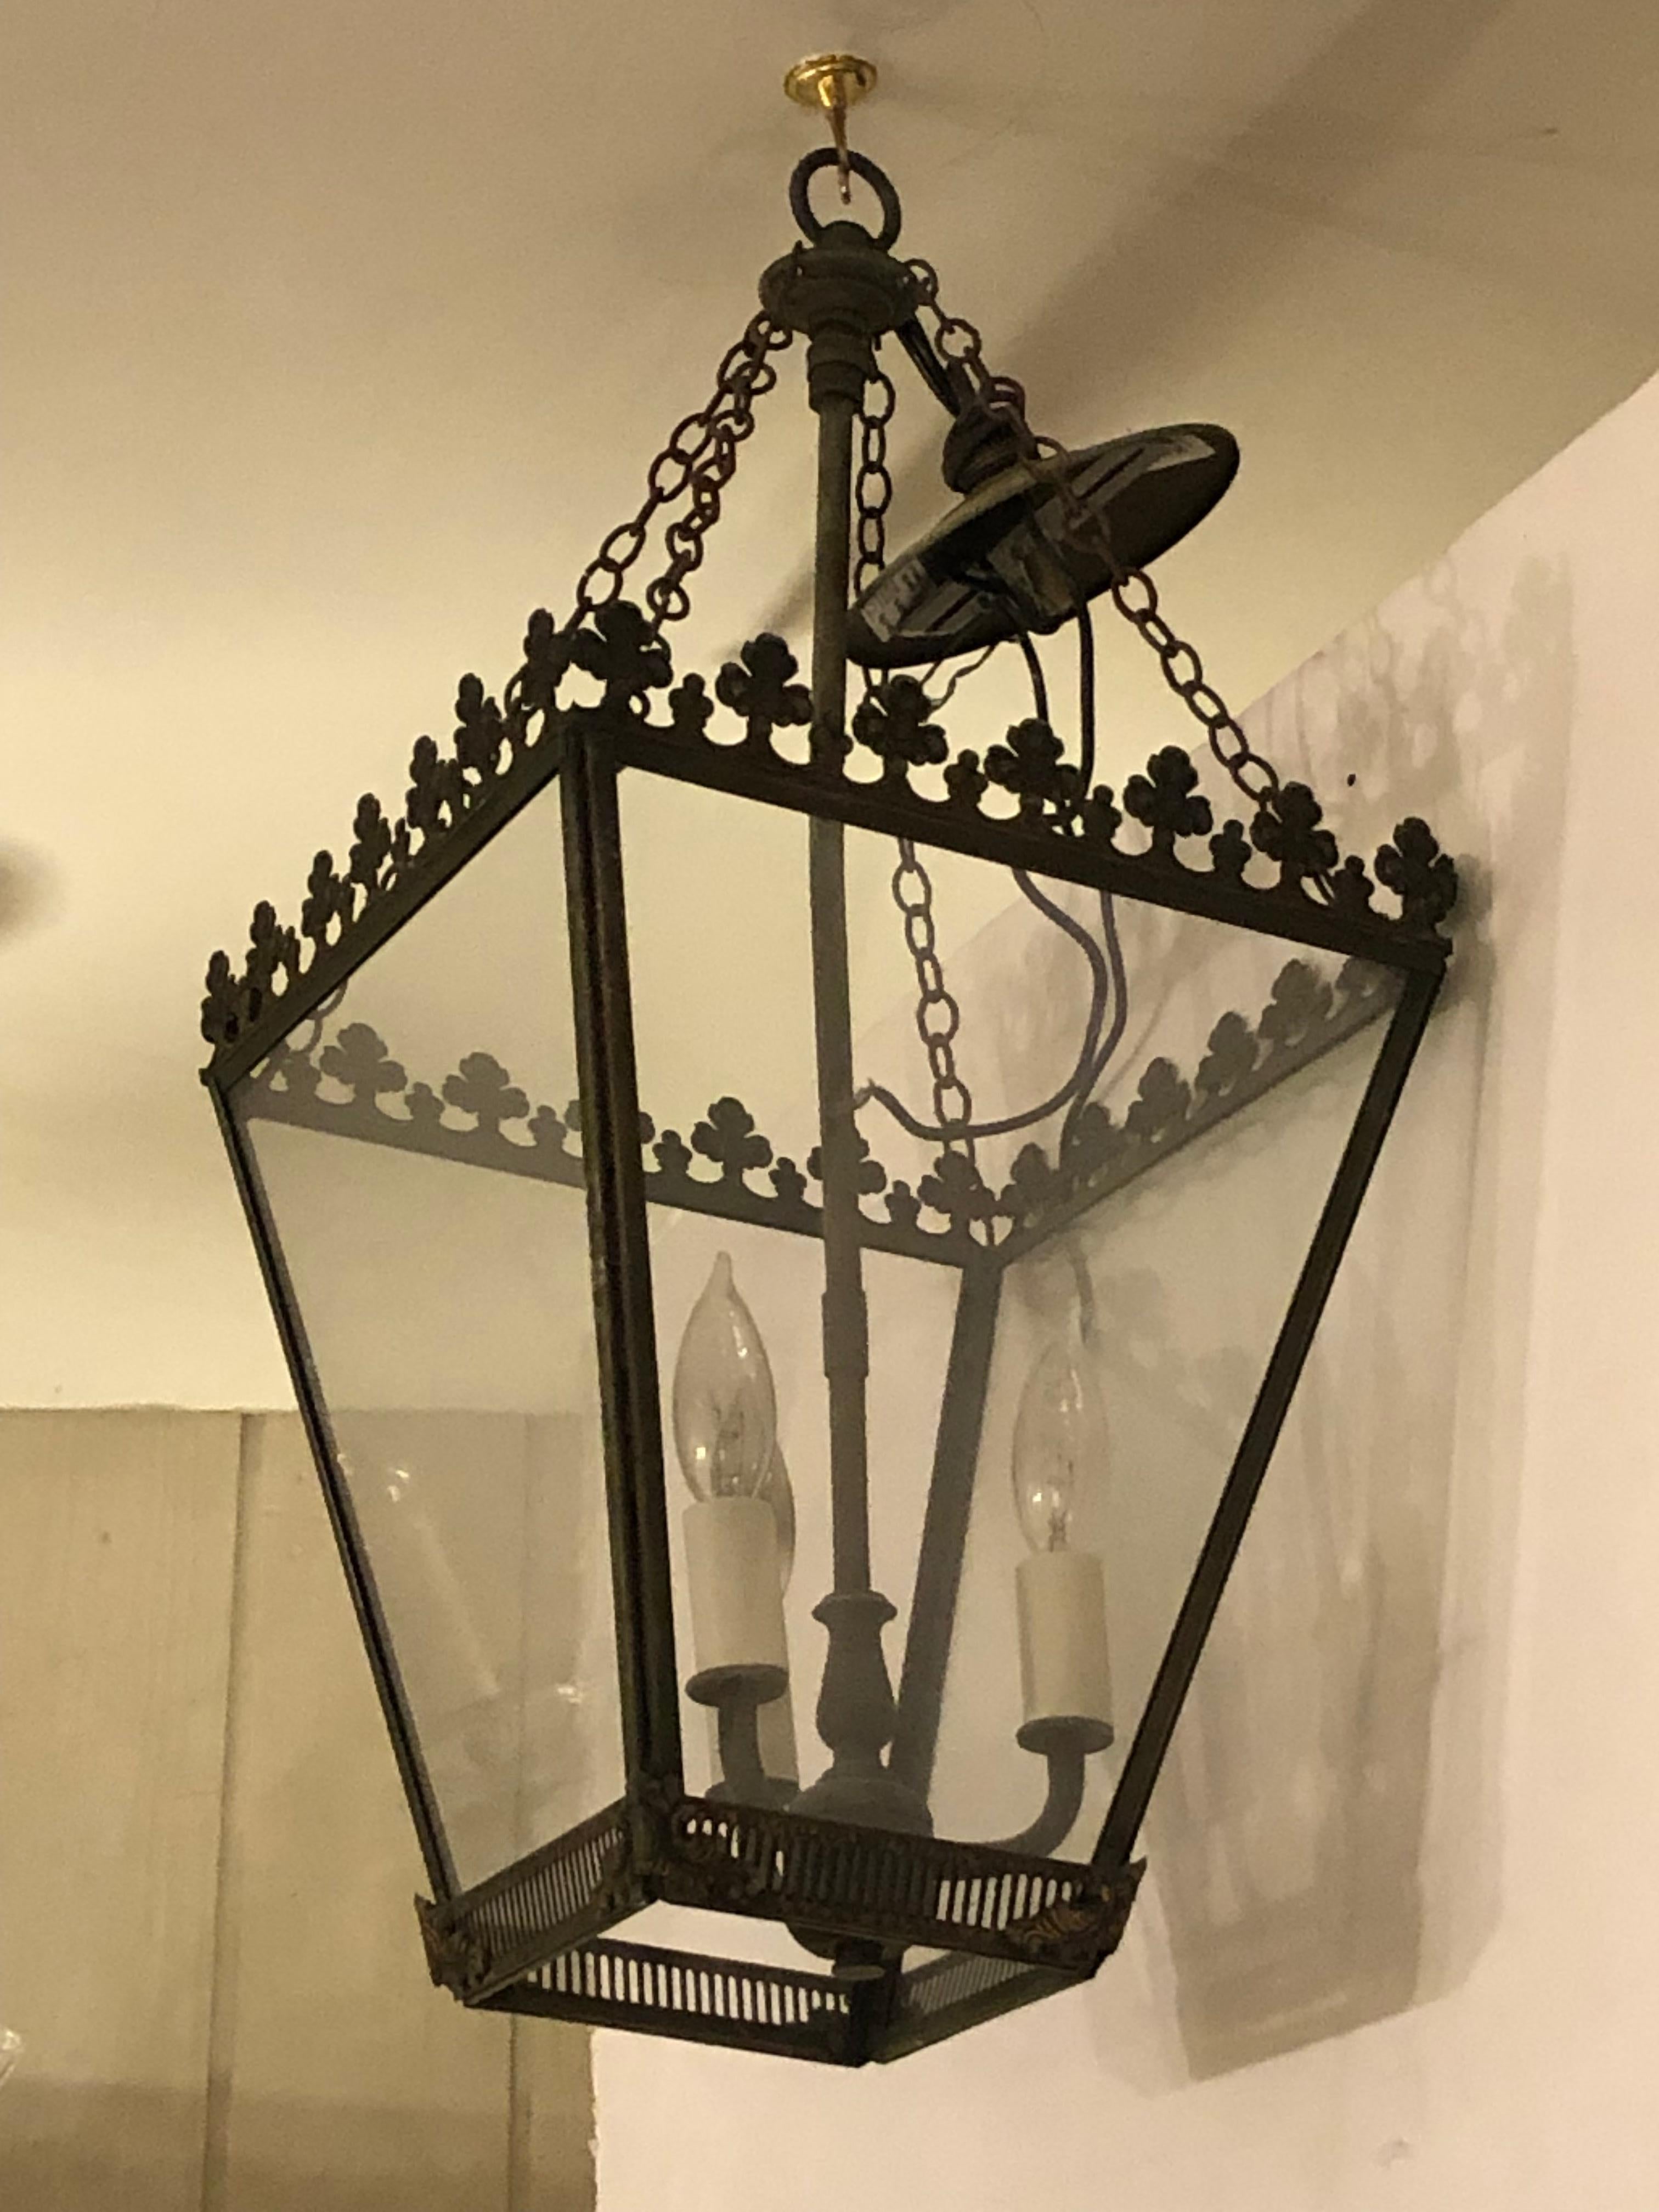 Lovely medium sized vintage very dark green tole metal and iron lantern having glass sides, 3 candle lights 40 watt each inside, and decorative clovers around the top.